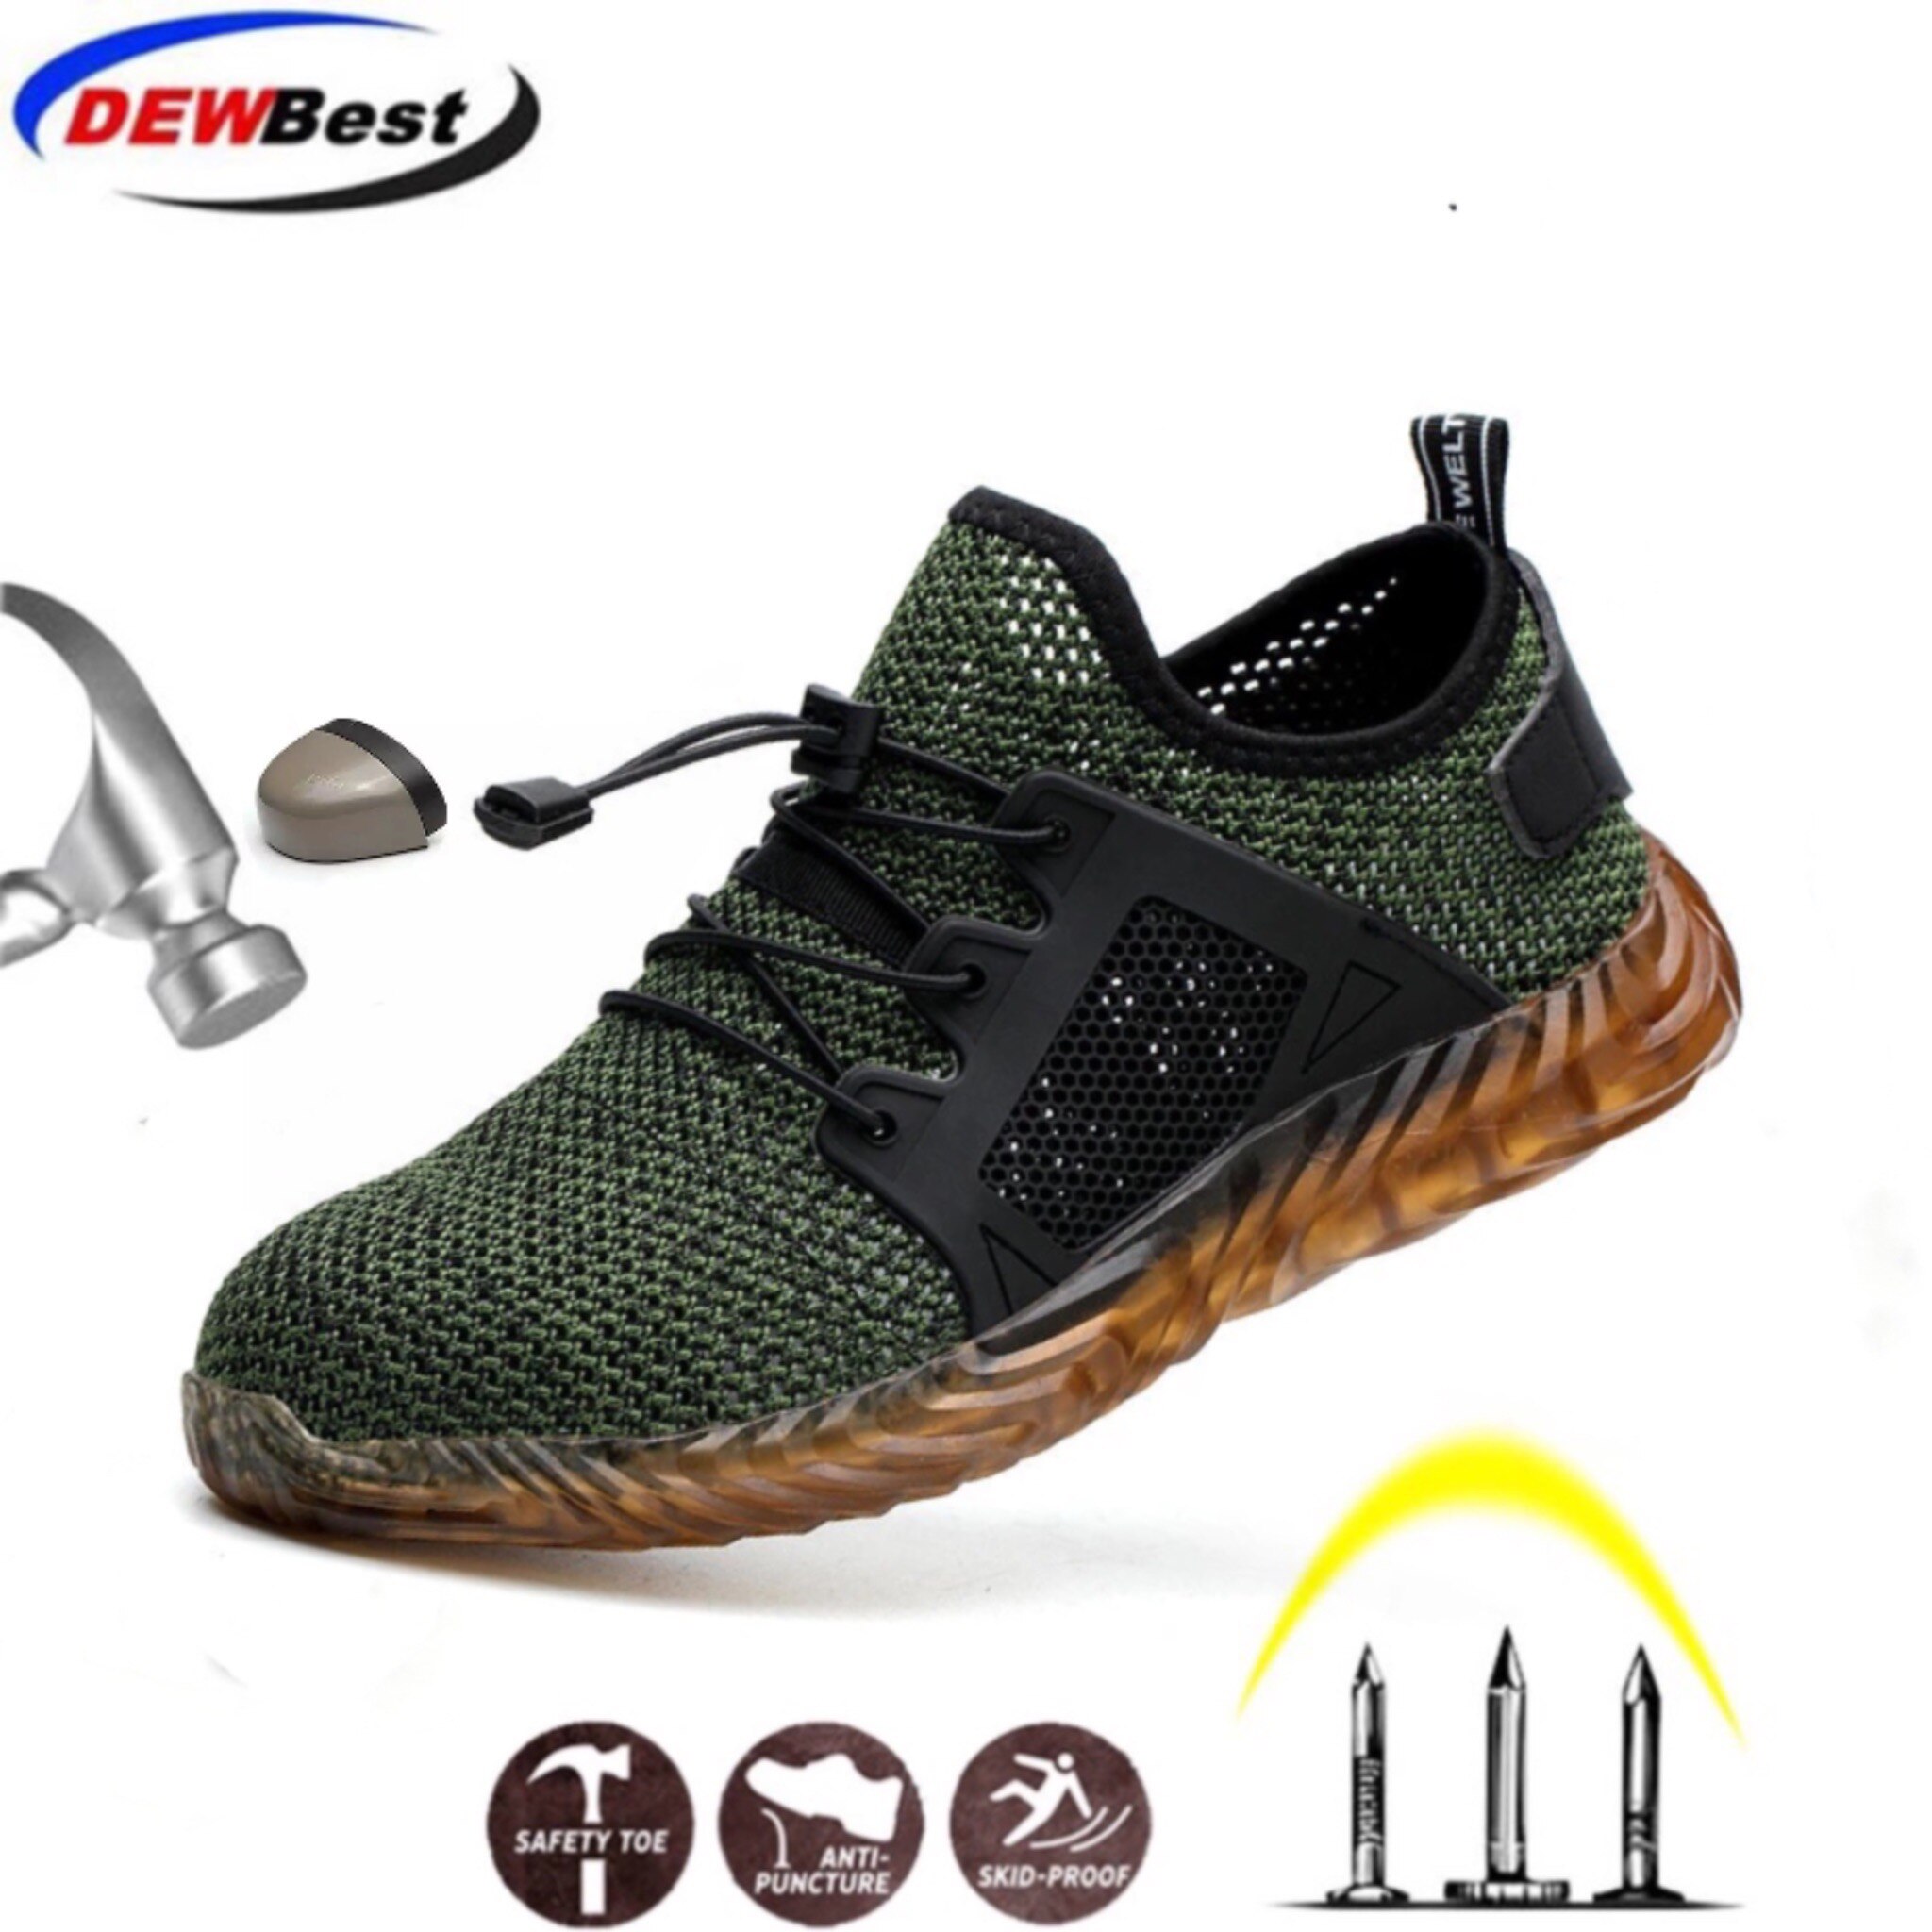 DEWBEST New Breathable Mesh Safety Shoes Men Light Sneaker Indestructible Steel Toe Soft Anti-piercing Work Boots Plus size